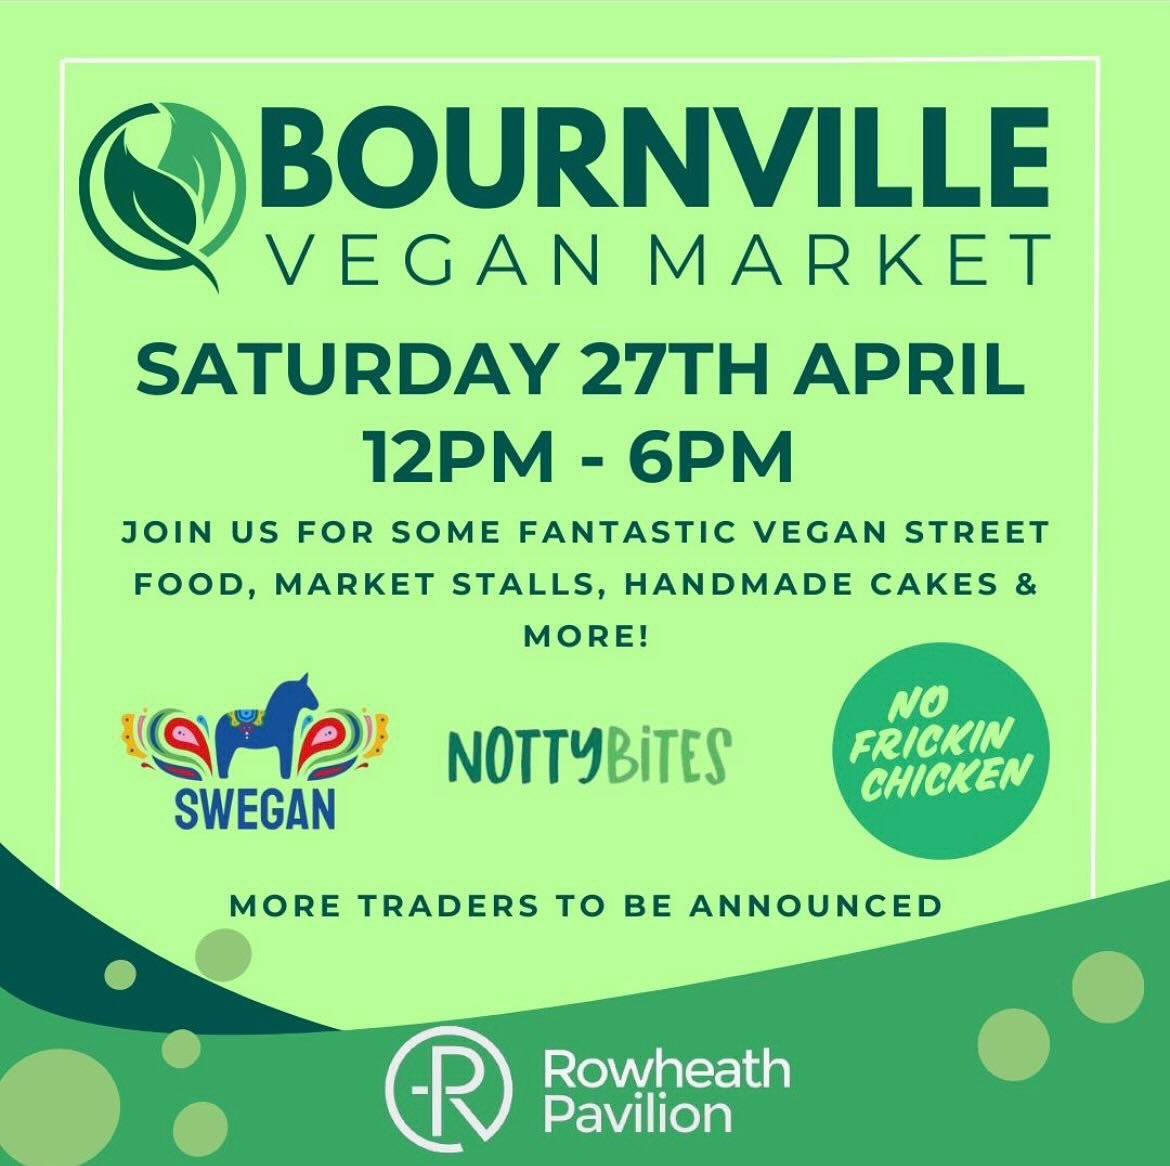 One week until we kick off our Summer season of Soul Bowl at Bourneville vegan market 🥣  Absolutely buzzing for this one ! ☀️